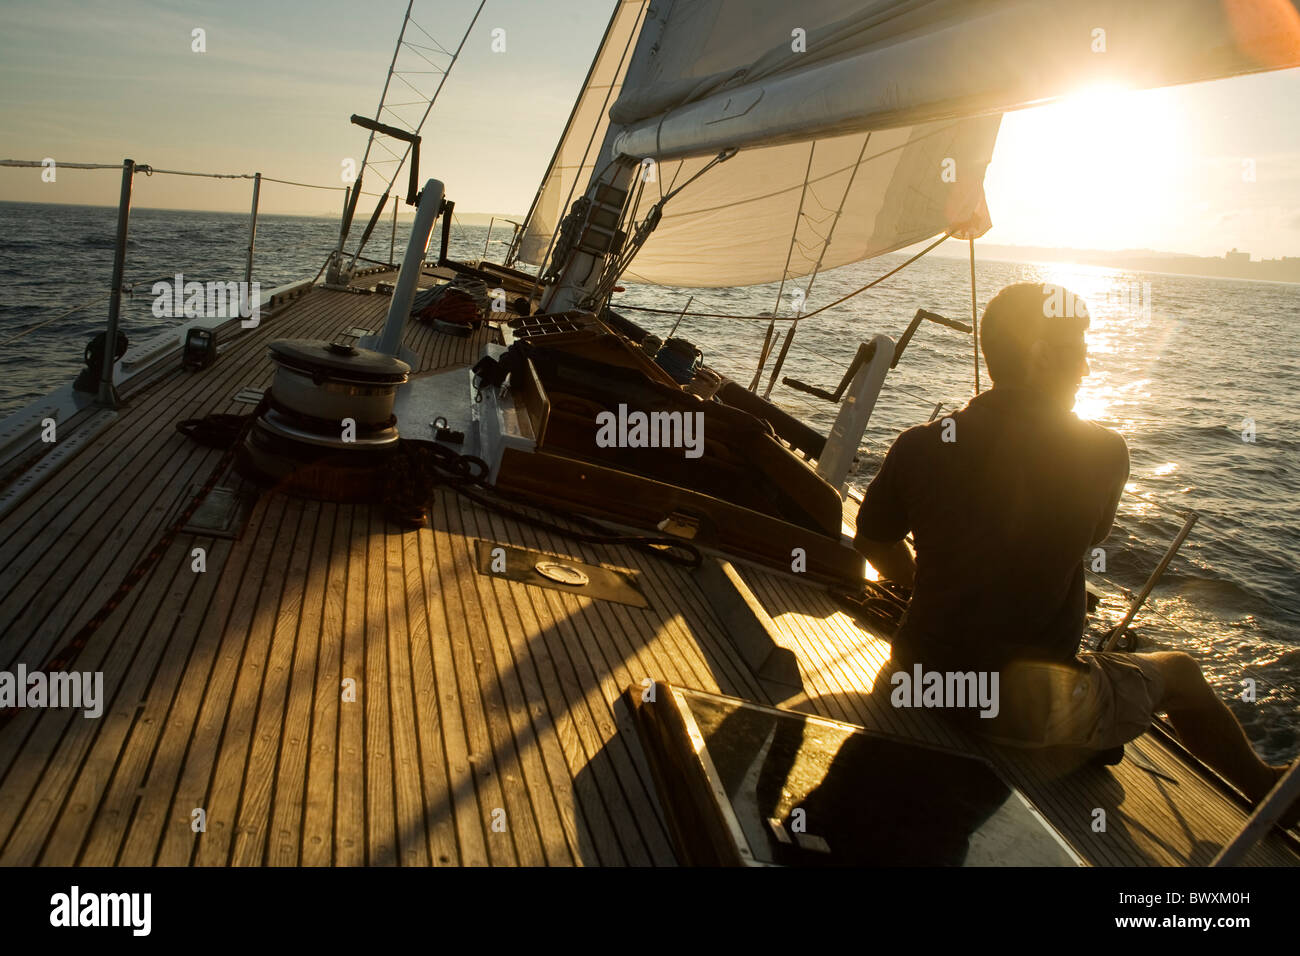 man sailing on the Atlantic ocean on a america's cup racing sail boat Stock Photo